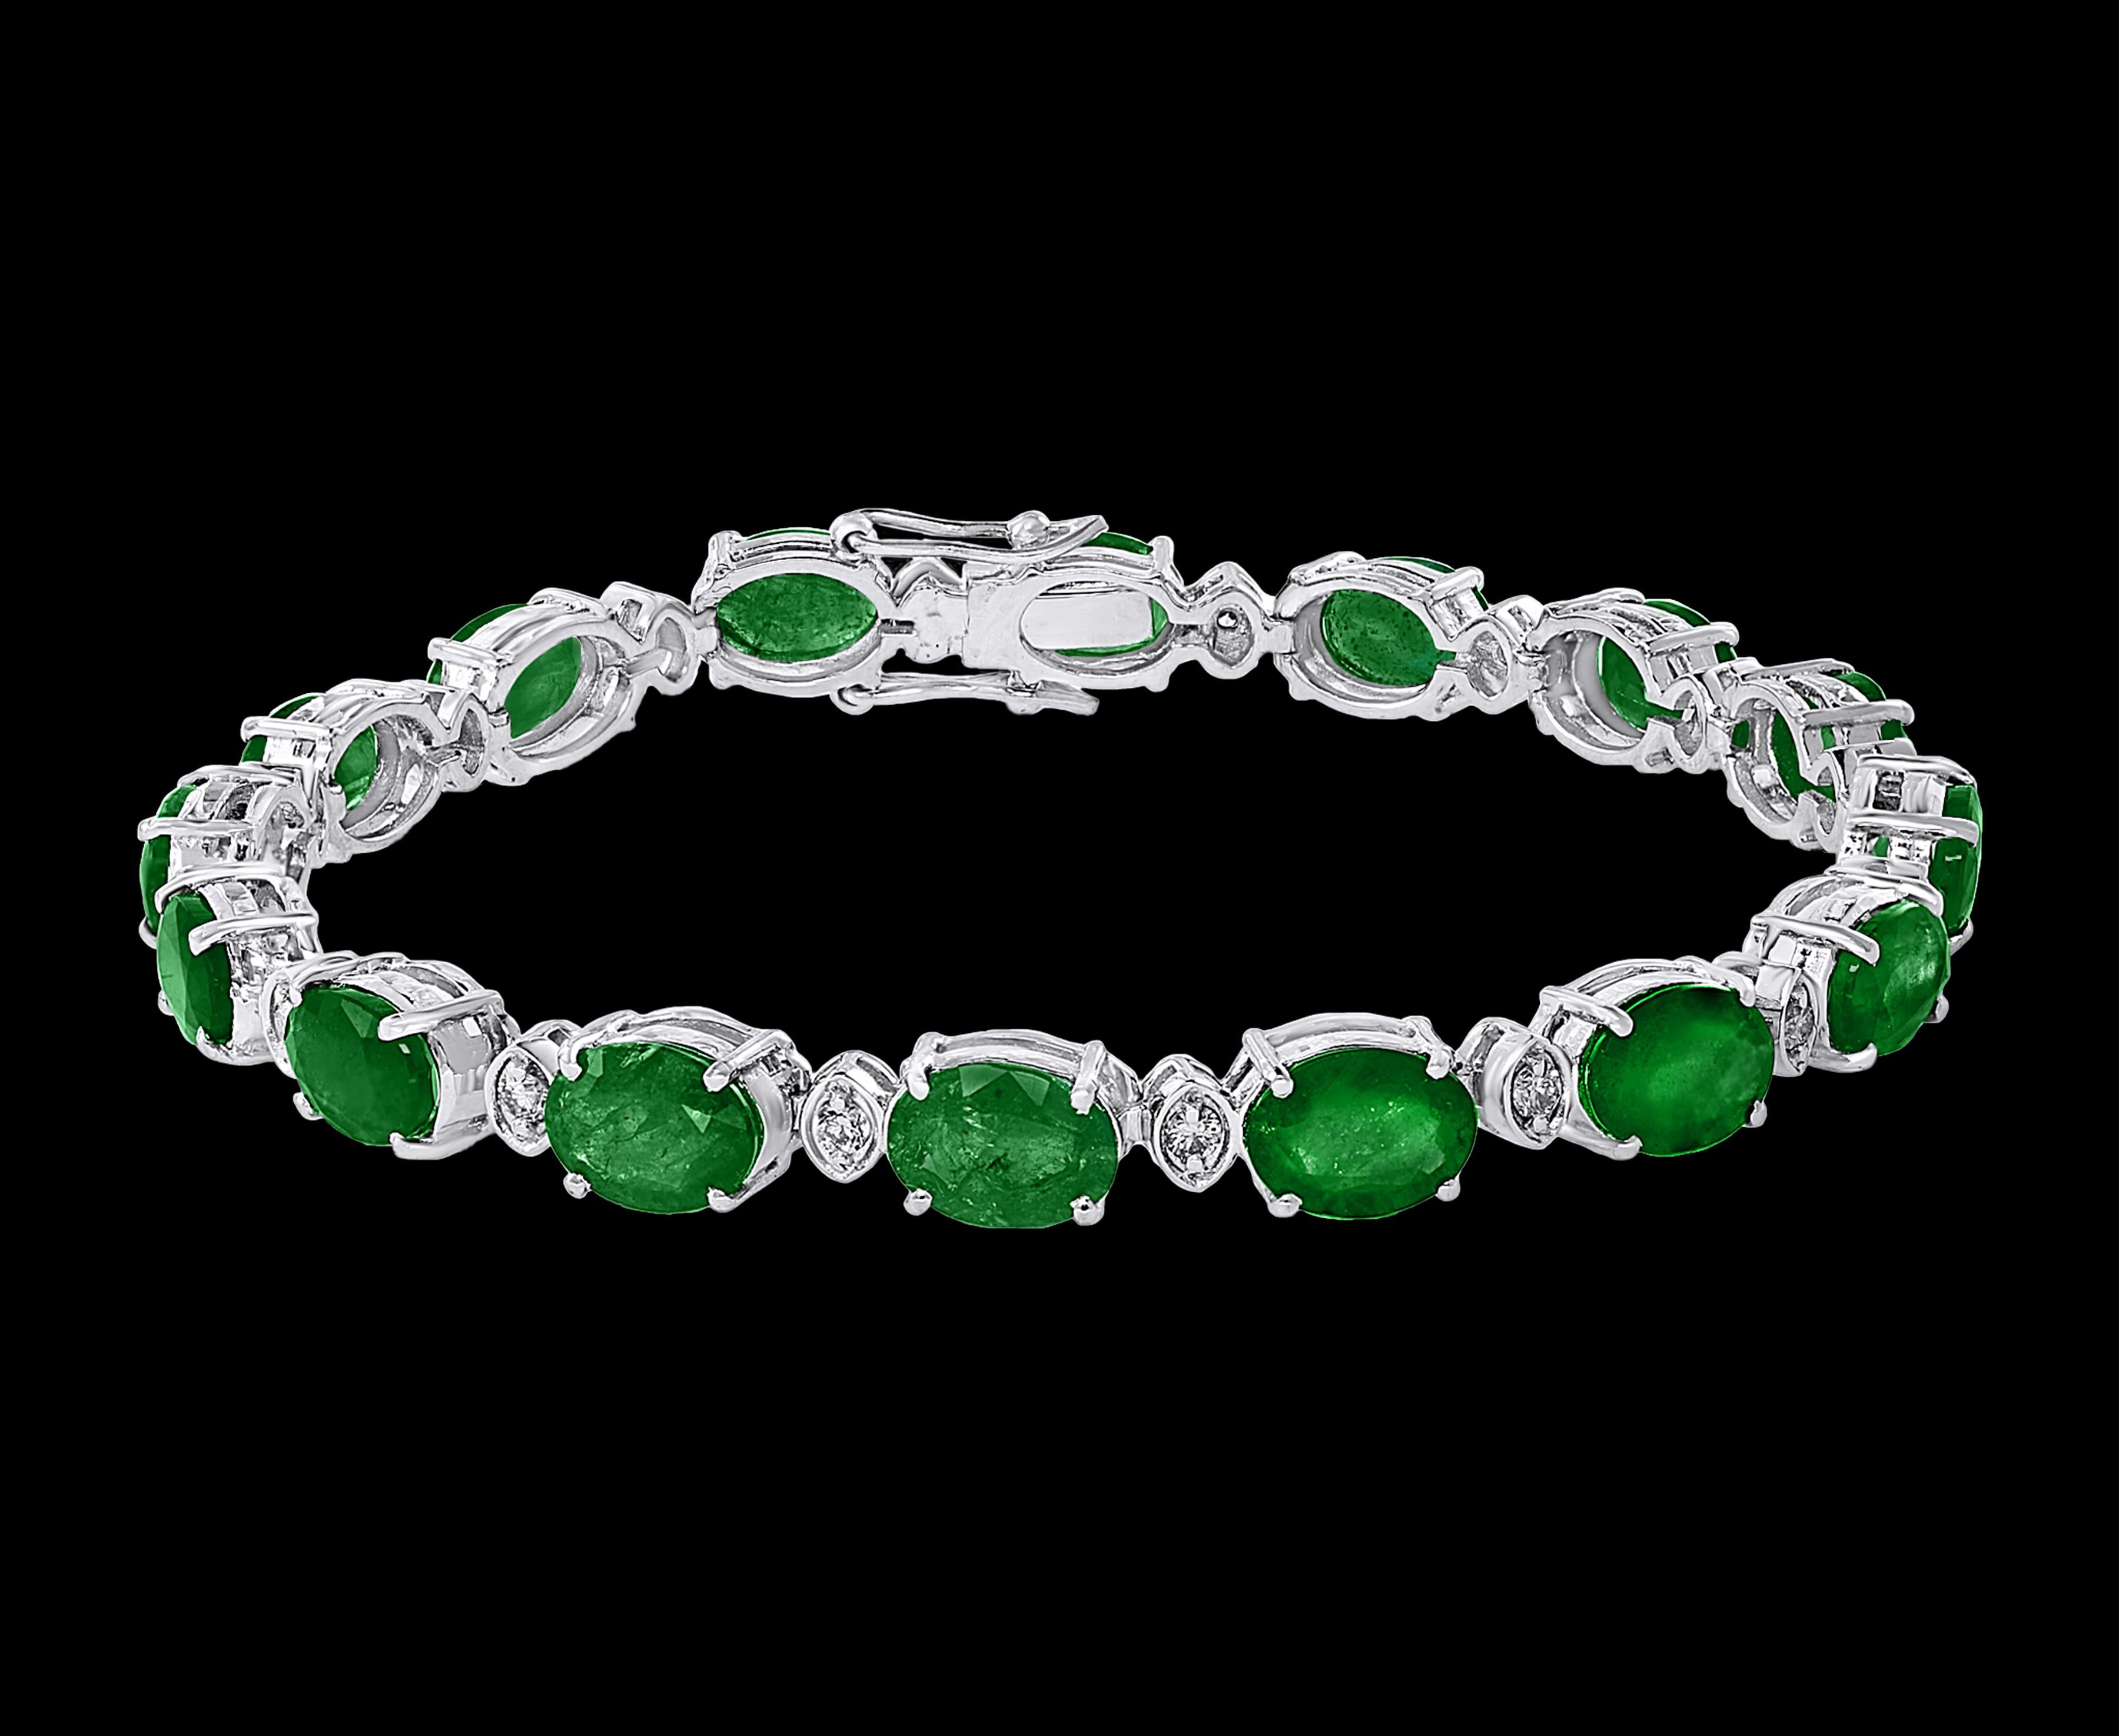  This exceptionally affordable Tennis  bracelet has  16 stones of oval  Emeralds  . Each Emerald is spaced by a single diamonds .Total weight of Emerald is approximately 14 carat. Total number of diamonds are 16 and diamond weighs 0.80 ct.
The